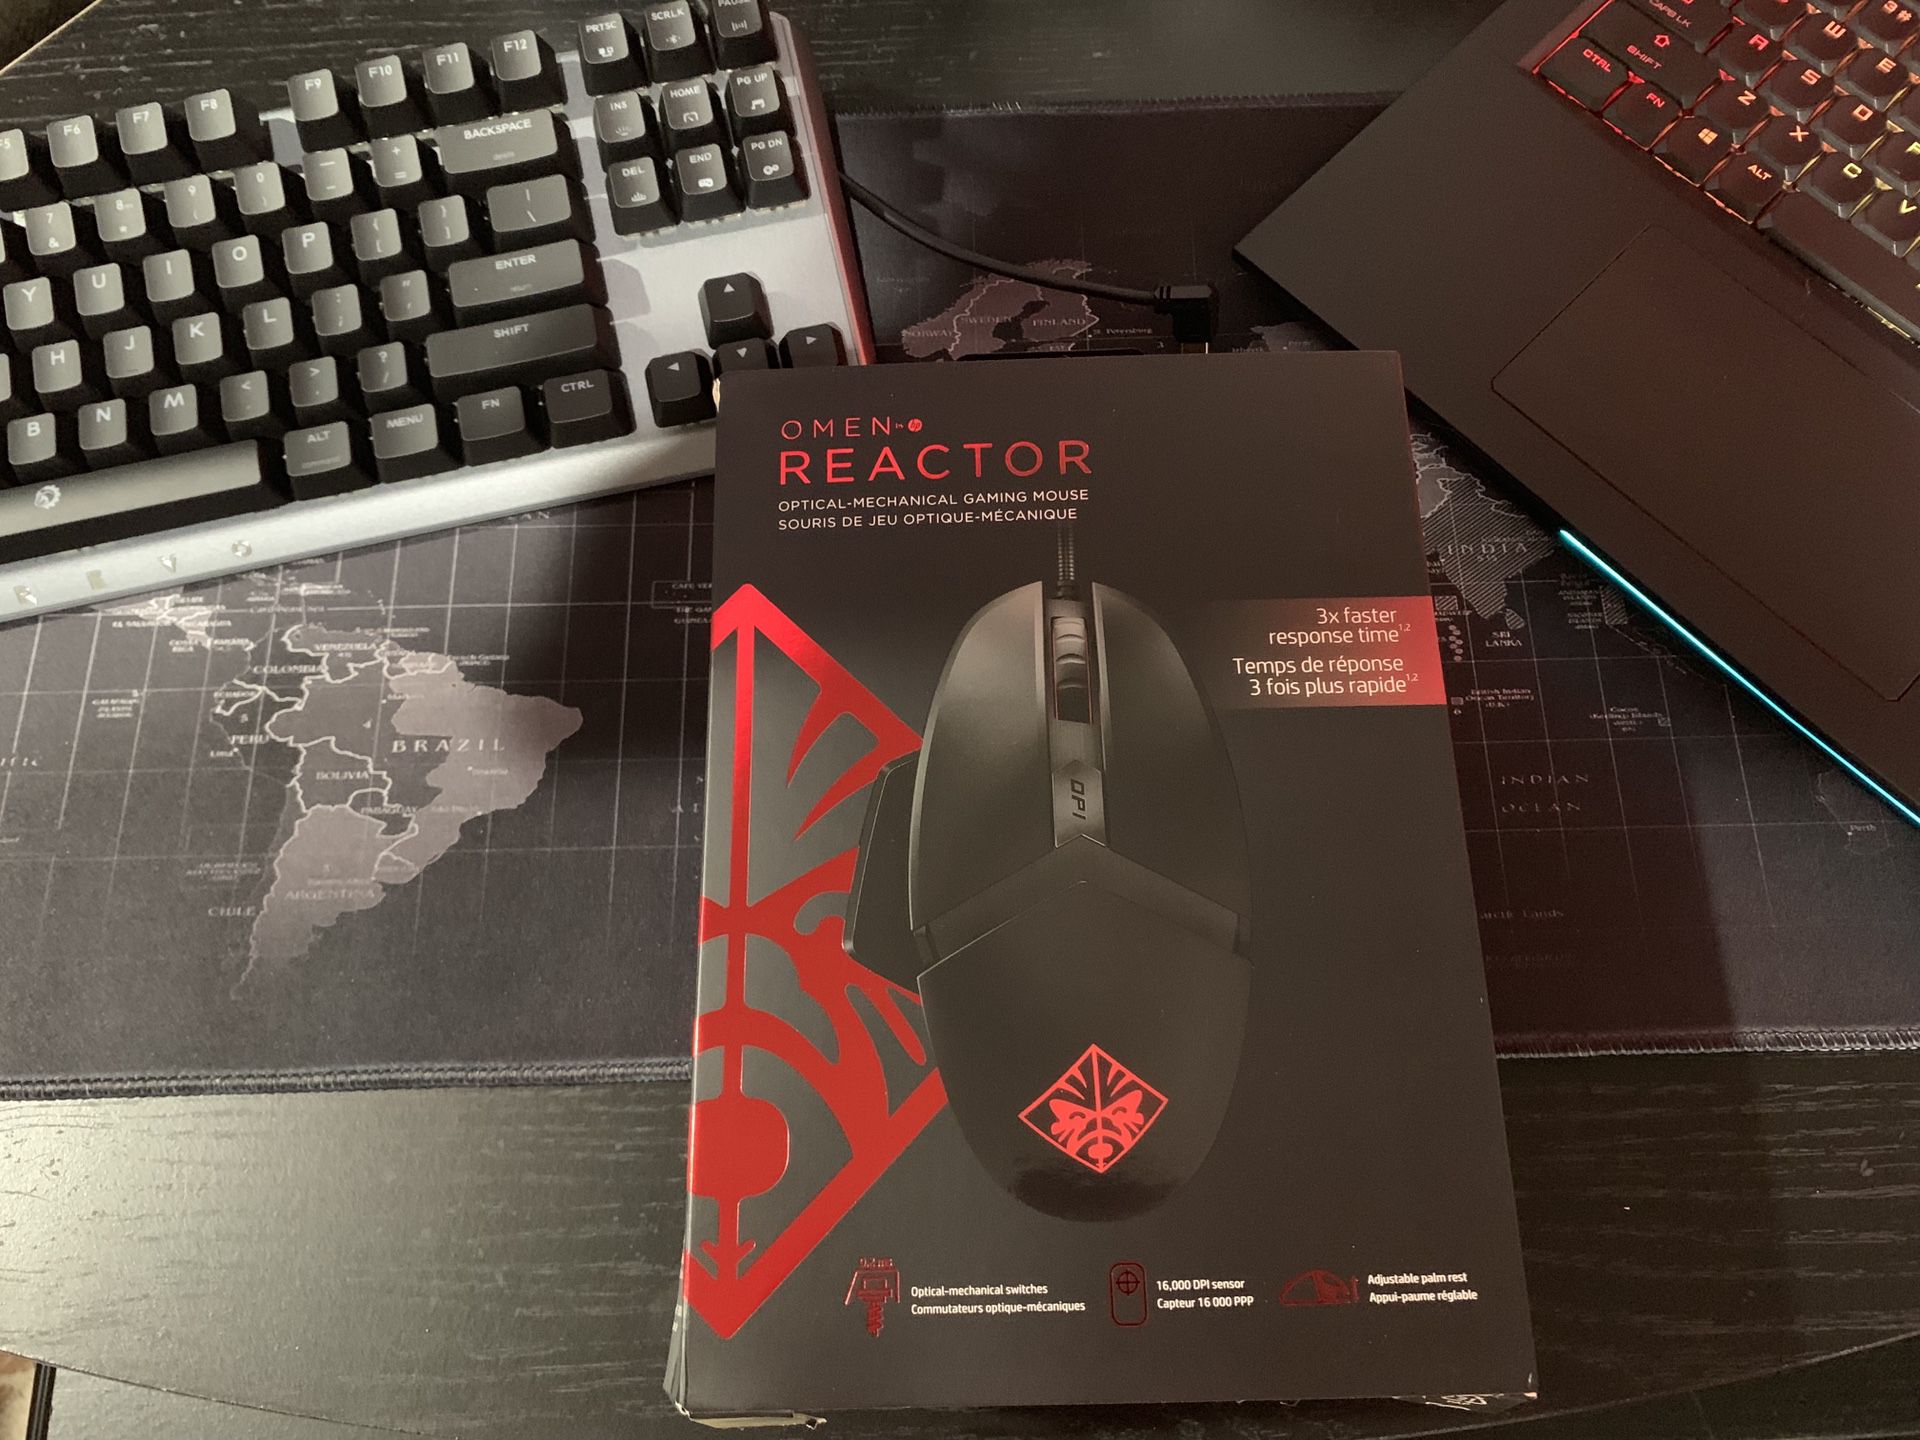 Omen reactor gaming mouse